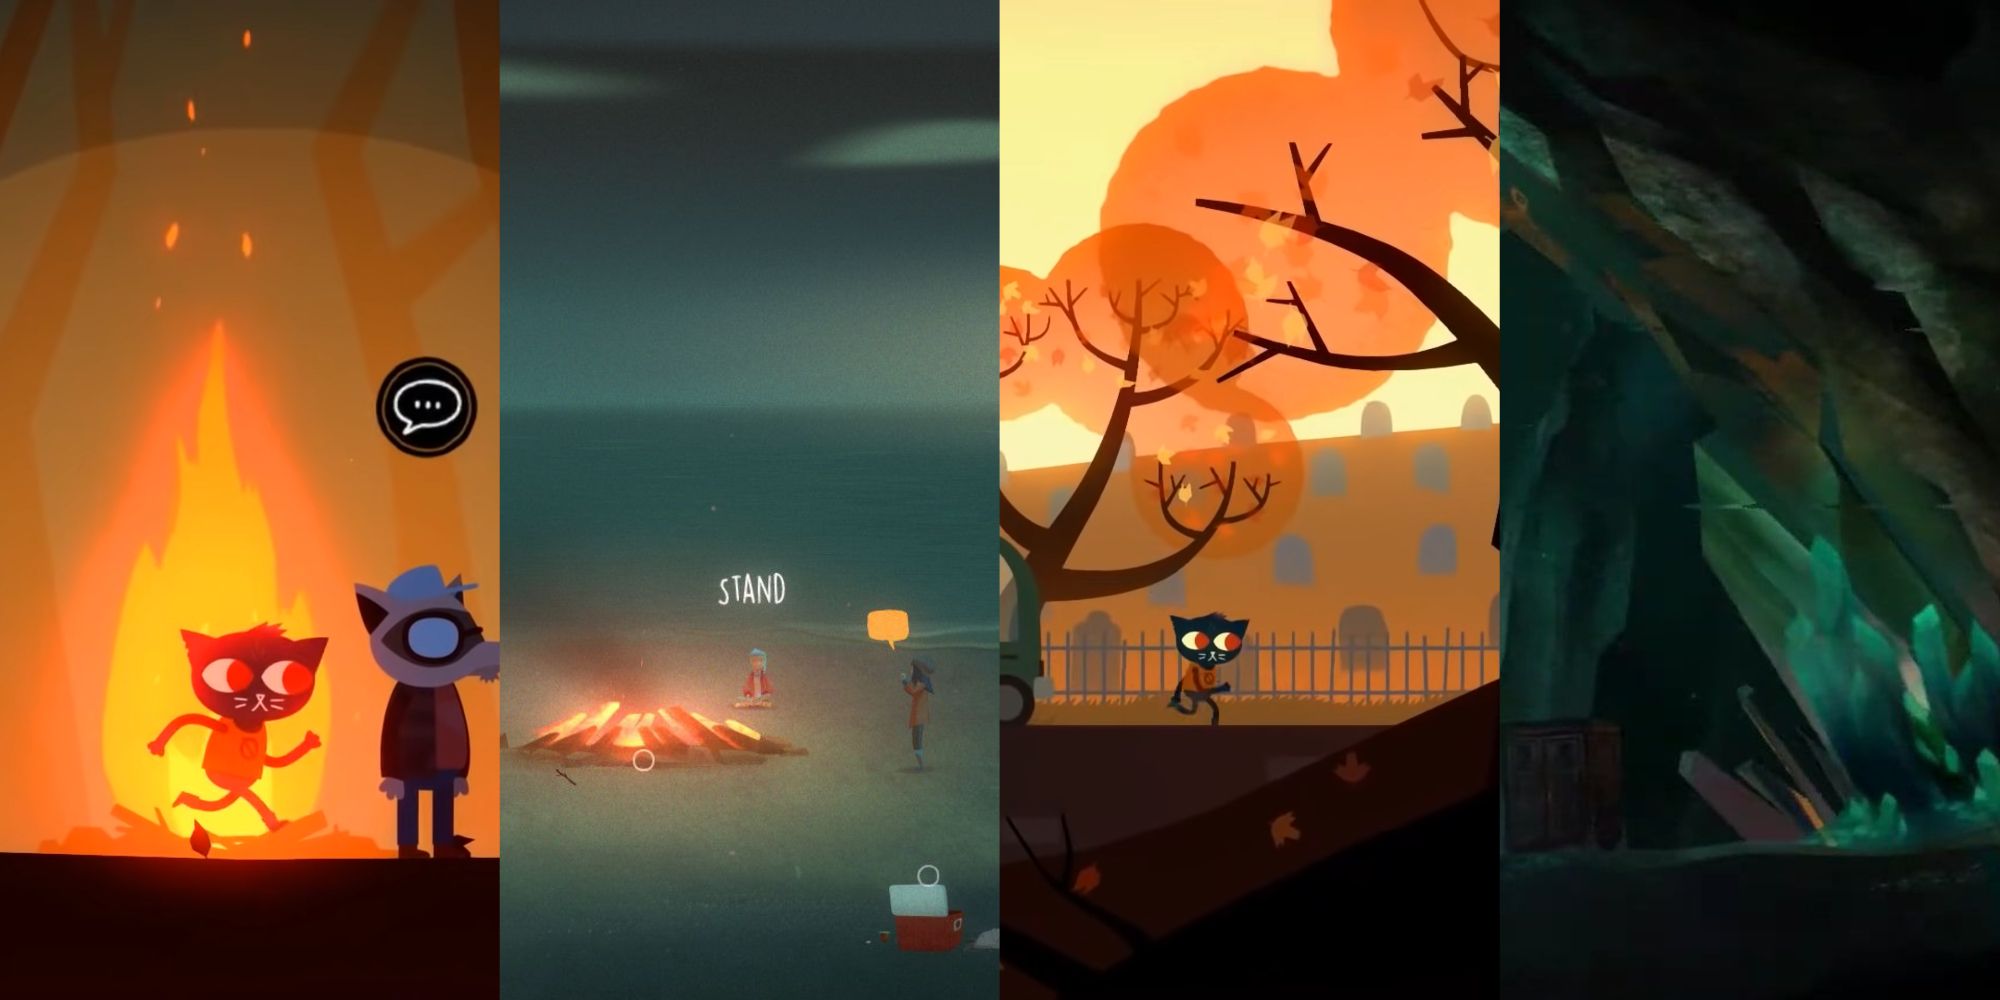 A collage of four images highlighting the similarities and differences between the art style of Oxenfree and Night in the Woods.